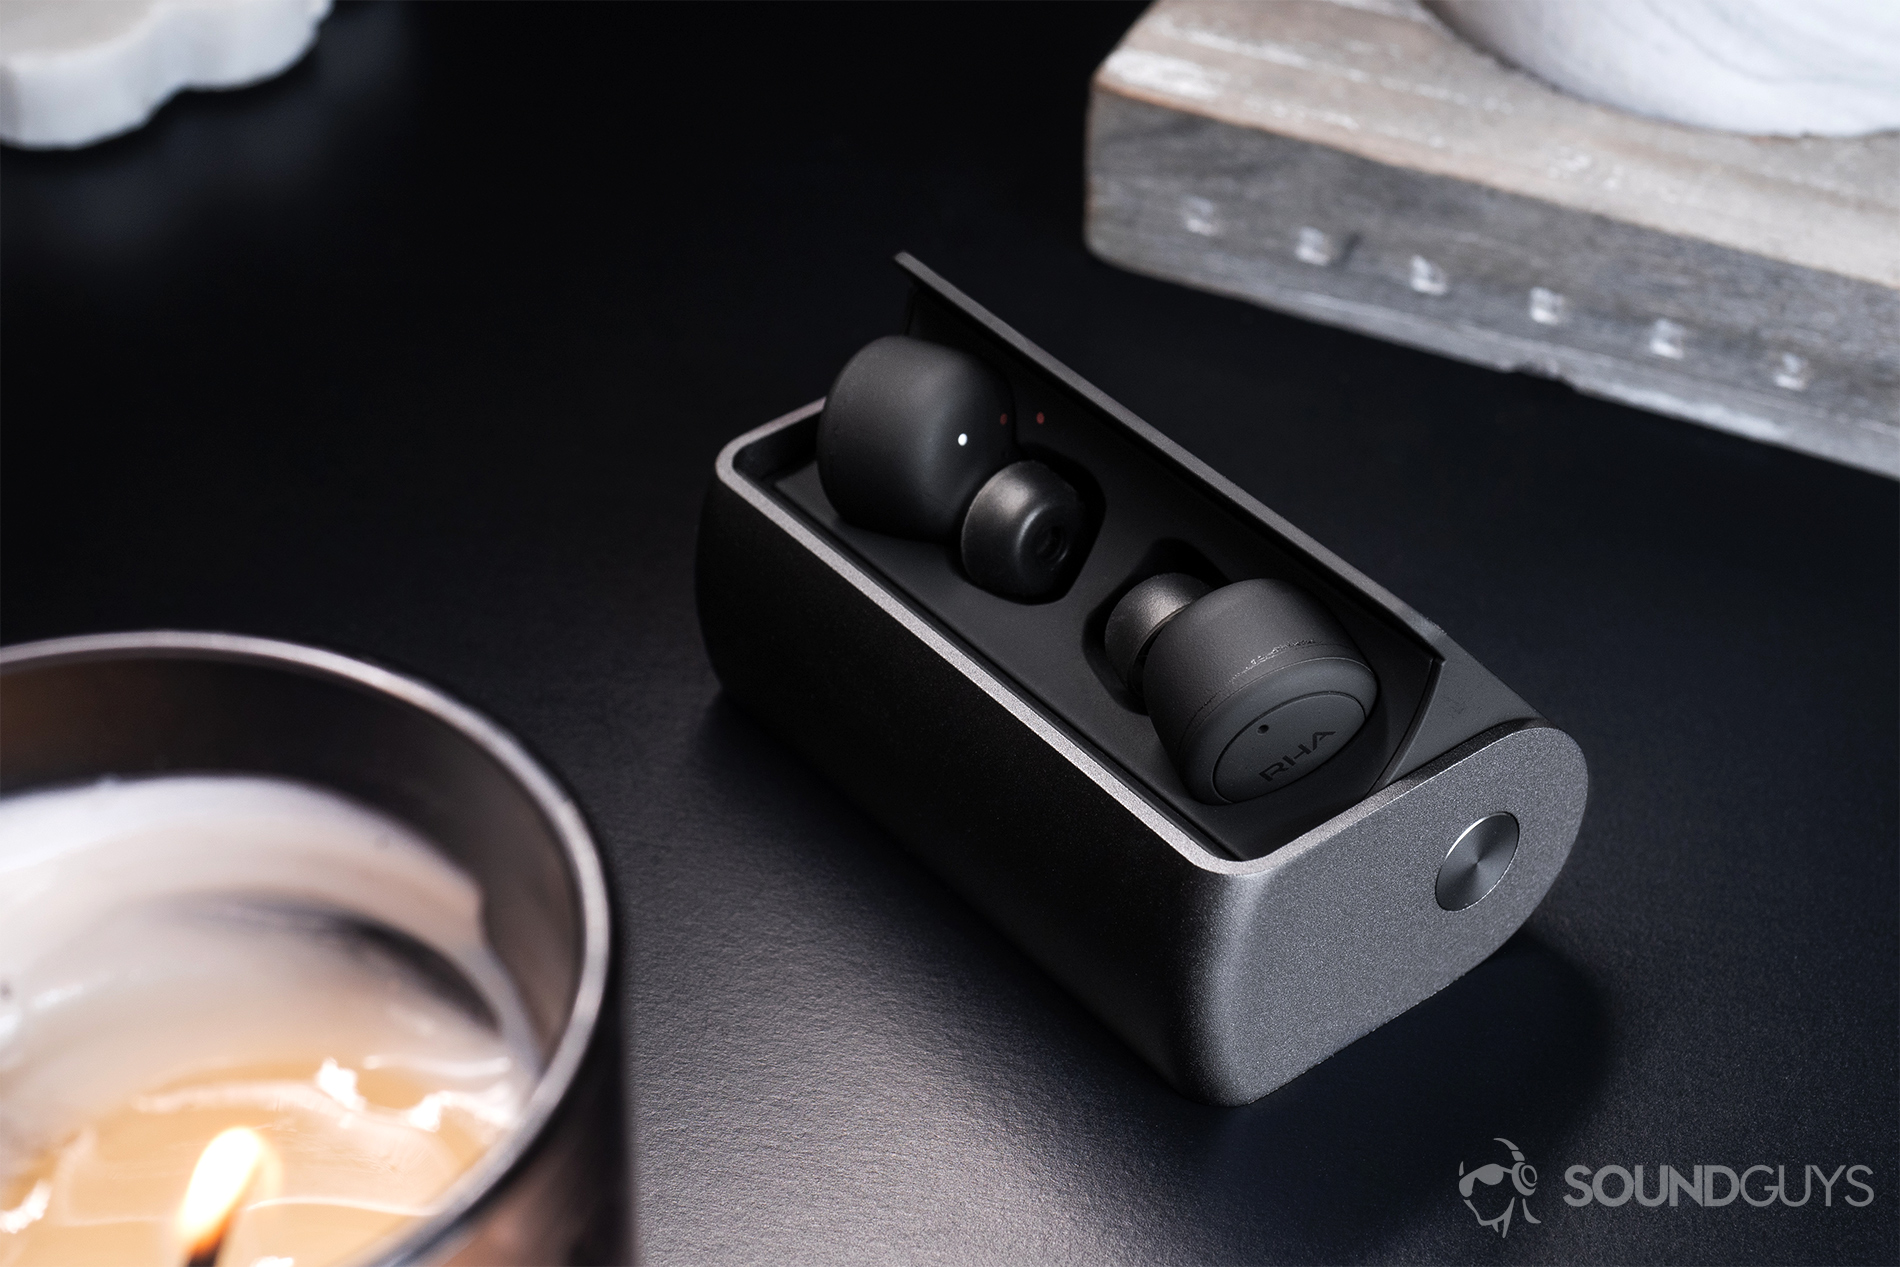 RHA TrueConnect true wireless earbuds in the open charging case which rests on a black table. A candle sits in the bottom left corner of the image.